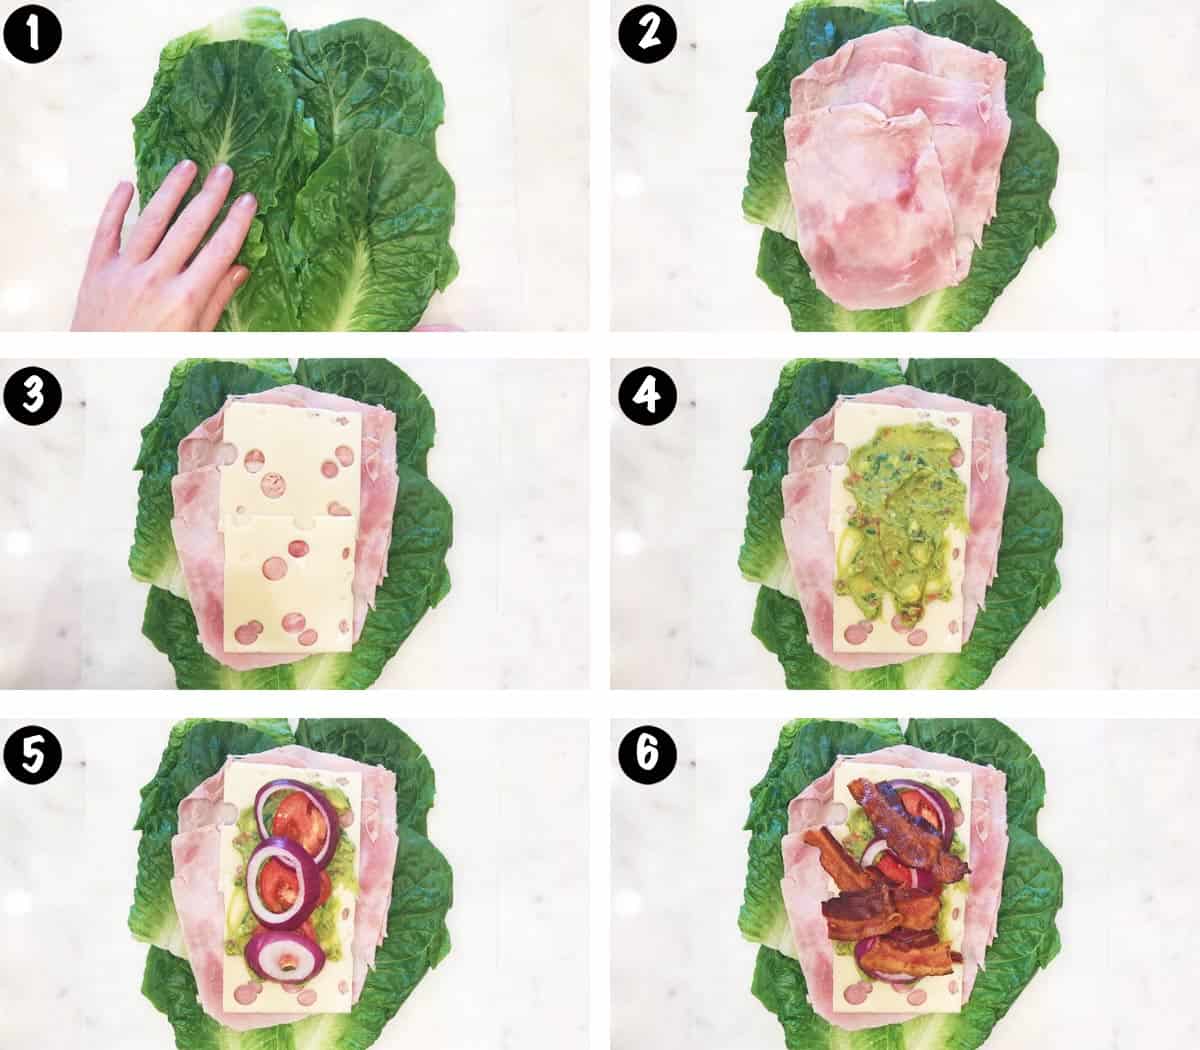 A photo collage showing steps 1-6 for making a lettuce sandwich. 